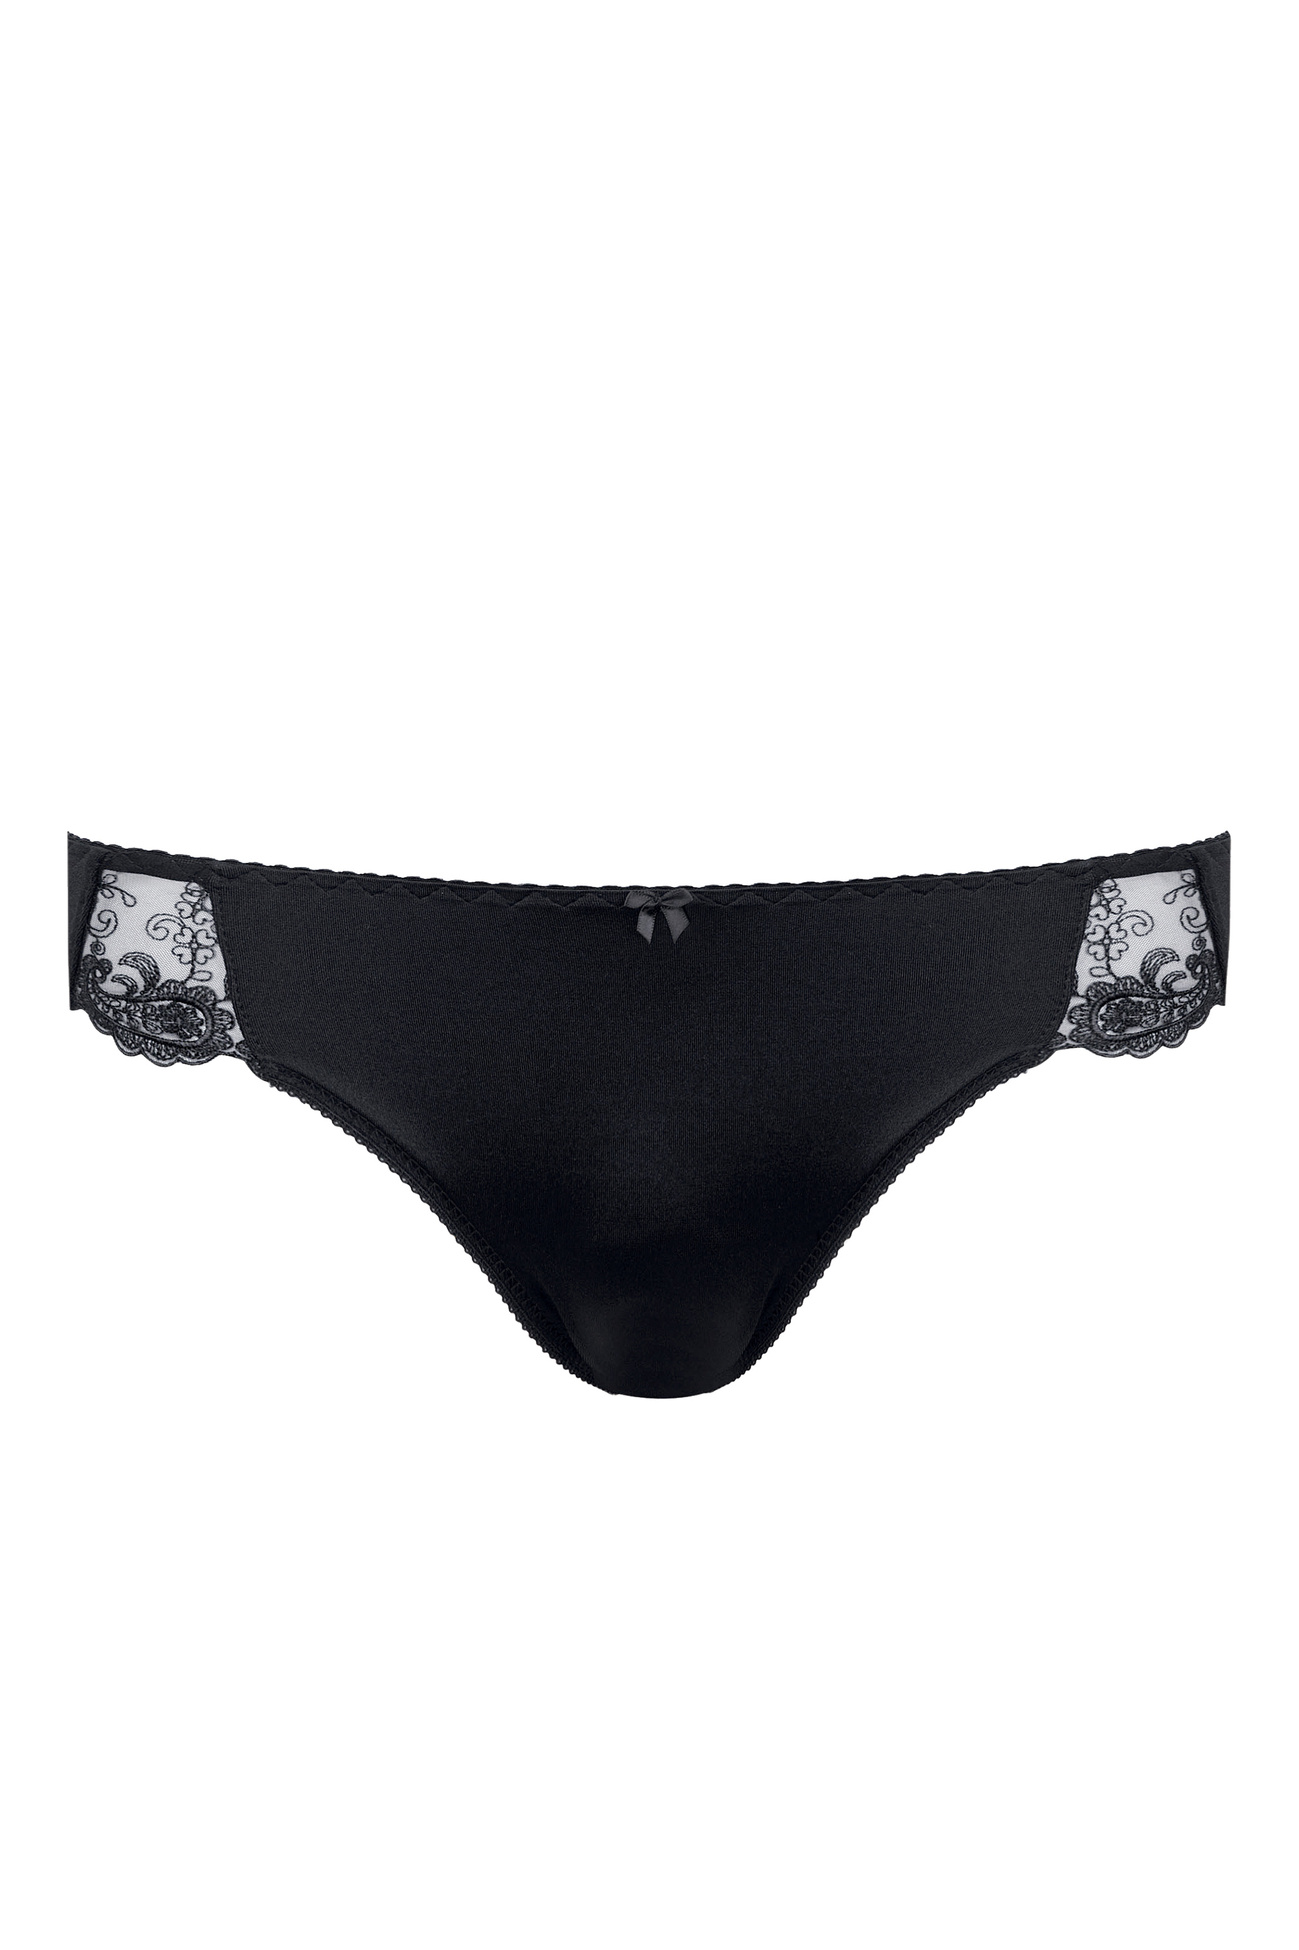 Yvette embroidered panty black